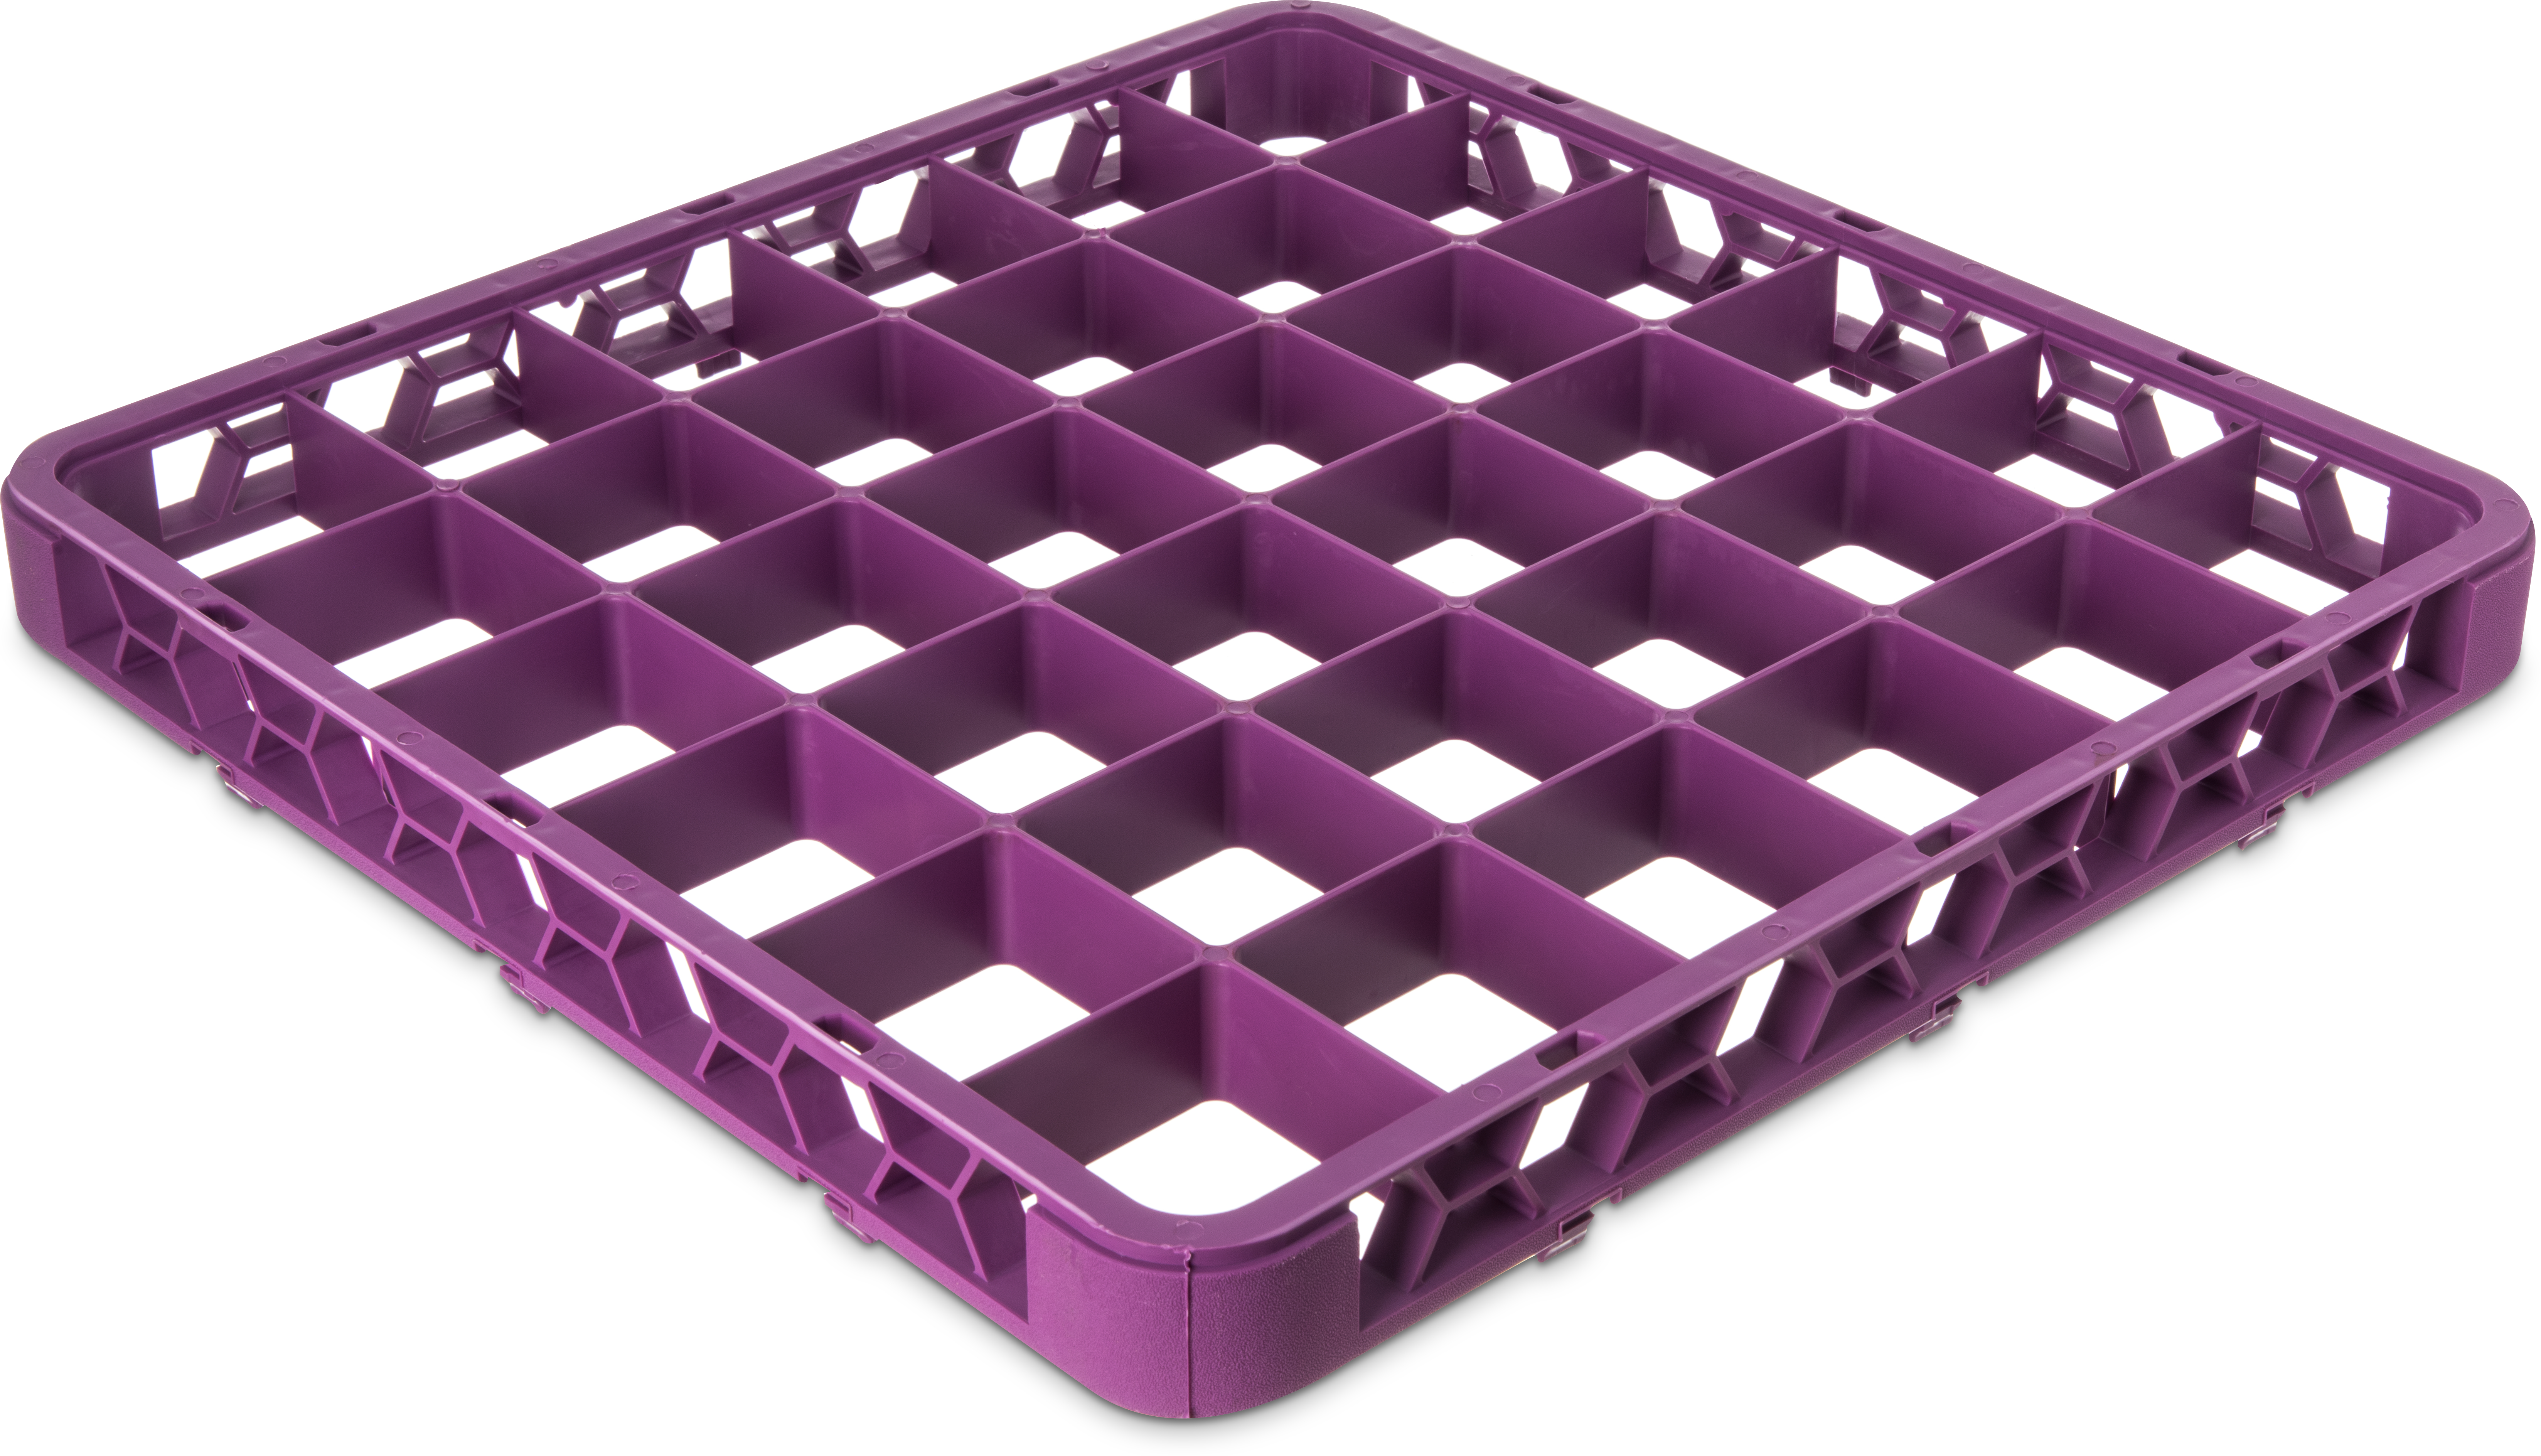 OptiClean 36 Compartment Divided Glass Rack Extender 1.78 - Lavender